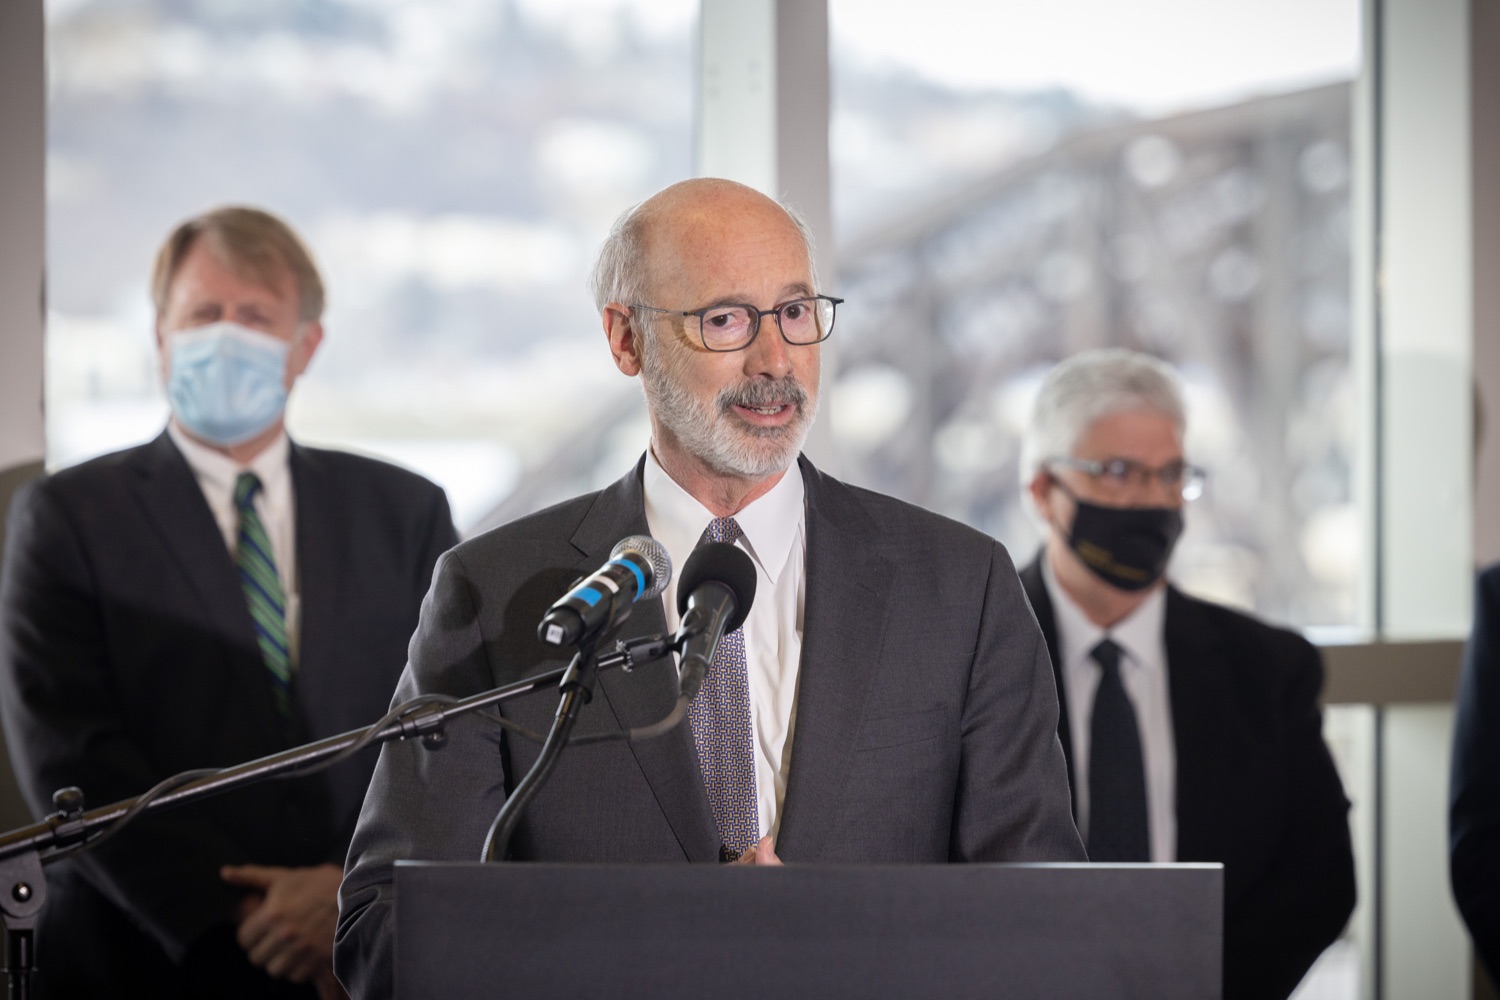 Pennsylvania Governor Tom Wolf speaks with the press.  Governor Tom Wolf and Pennsylvania Department of Transportation (PennDOT) Deputy Secretary for Multimodal Transportation Jennie Louwerse were joined by Federal Railroad Administration Administrator Amit Bose, Norfolk Southern (NS) Regional Vice President Rudy Husband and local officials today to announce that the federal Bipartisan Infrastructure Law (BIL) has paved the way for movement toward improved freight and passenger-rail service between Harrisburg and Pittsburgh. Pittsburgh, PA  February 18, 2022<br><a href="https://filesource.amperwave.net/commonwealthofpa/photo/20547_gov_infrastructure_dz_015.jpg" target="_blank">⇣ Download Photo</a>